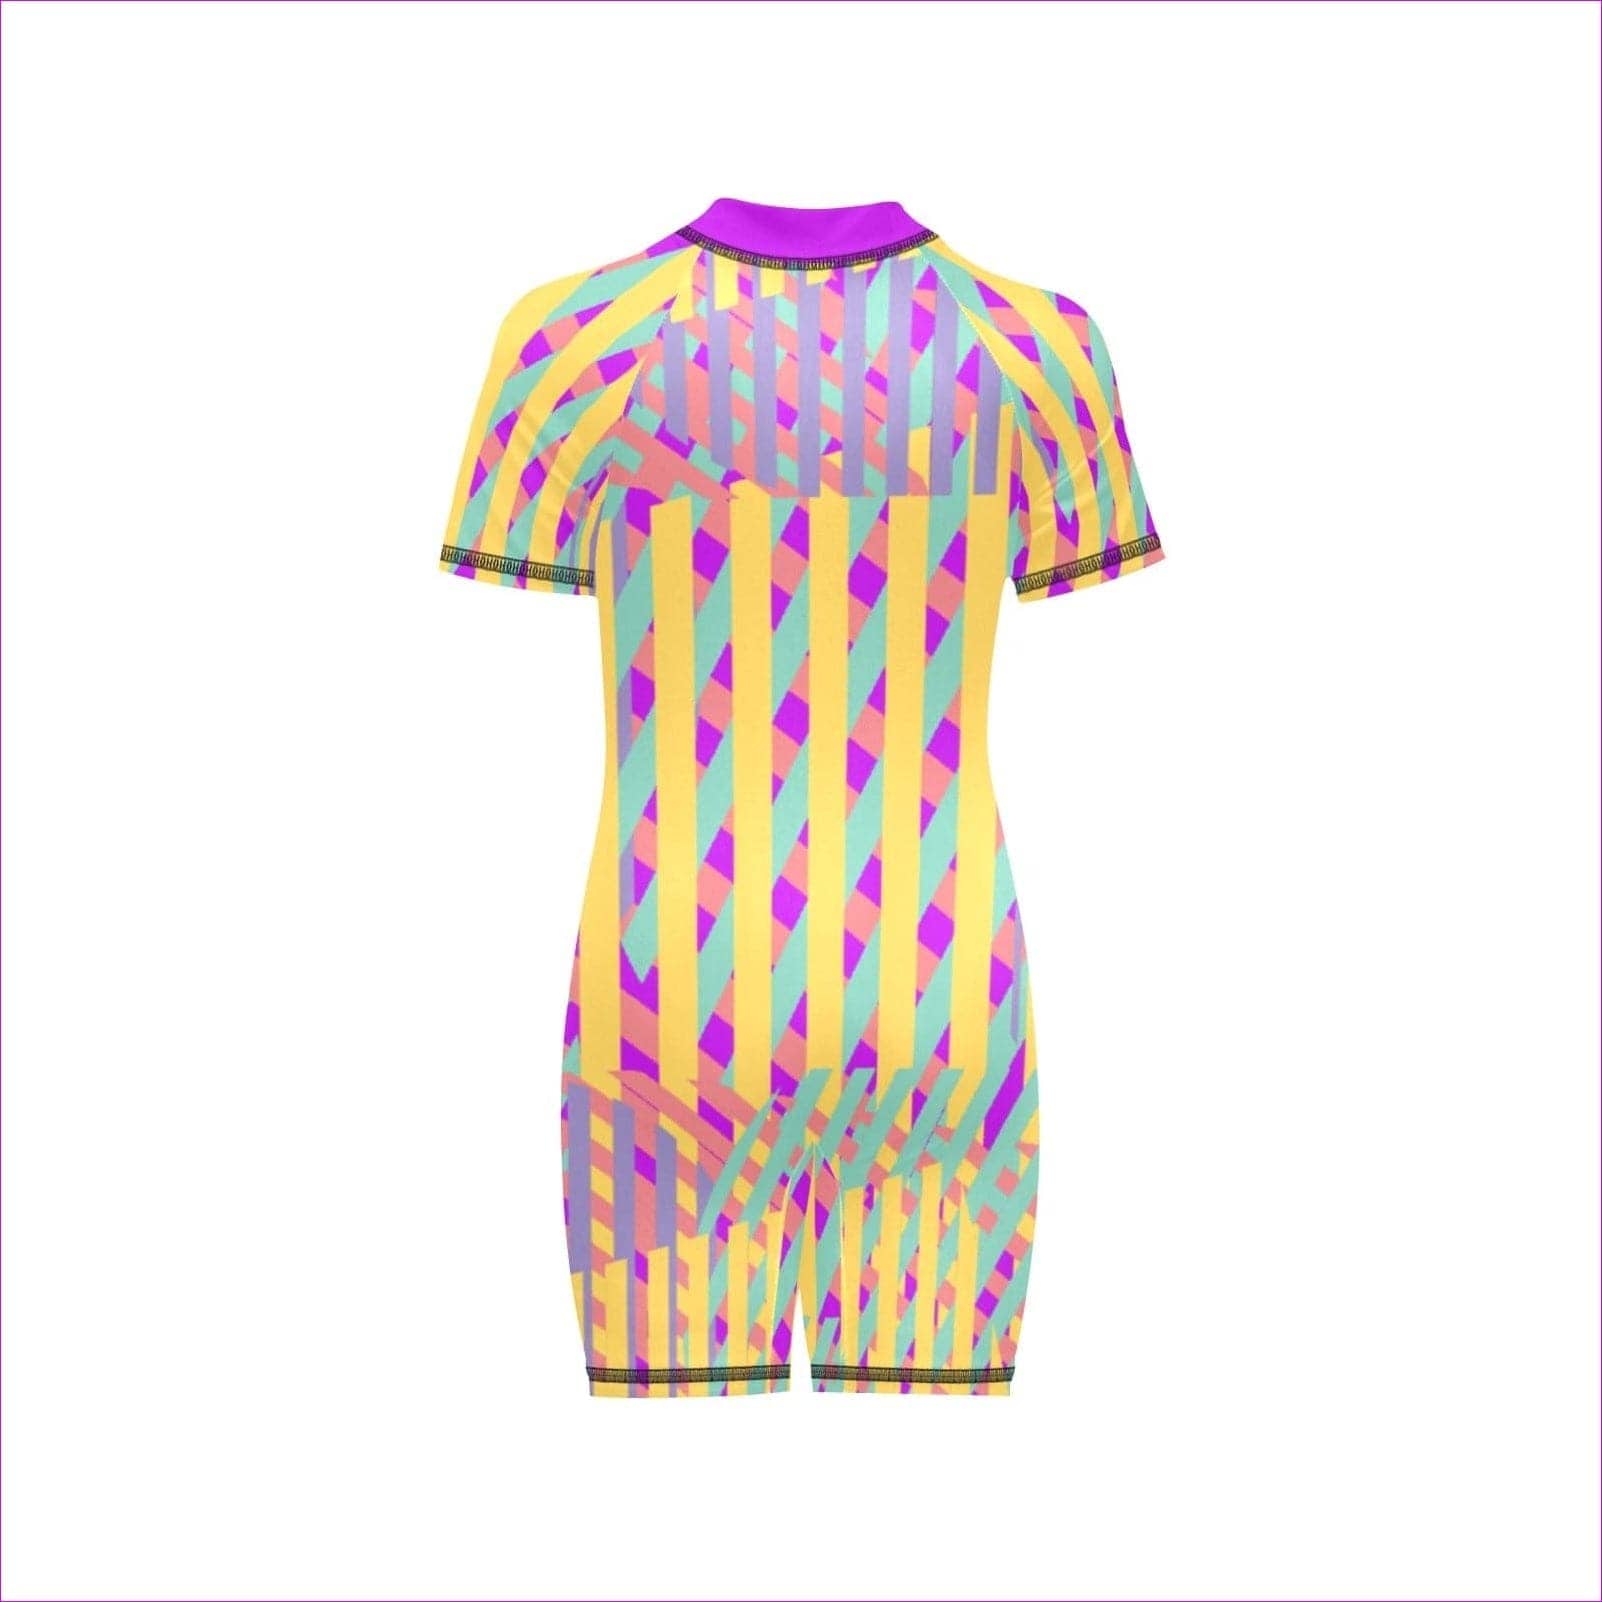 - Vivid Weaved Girls Short Sleeve One-Piece Swimsuit - kids swimsuit at TFC&H Co.